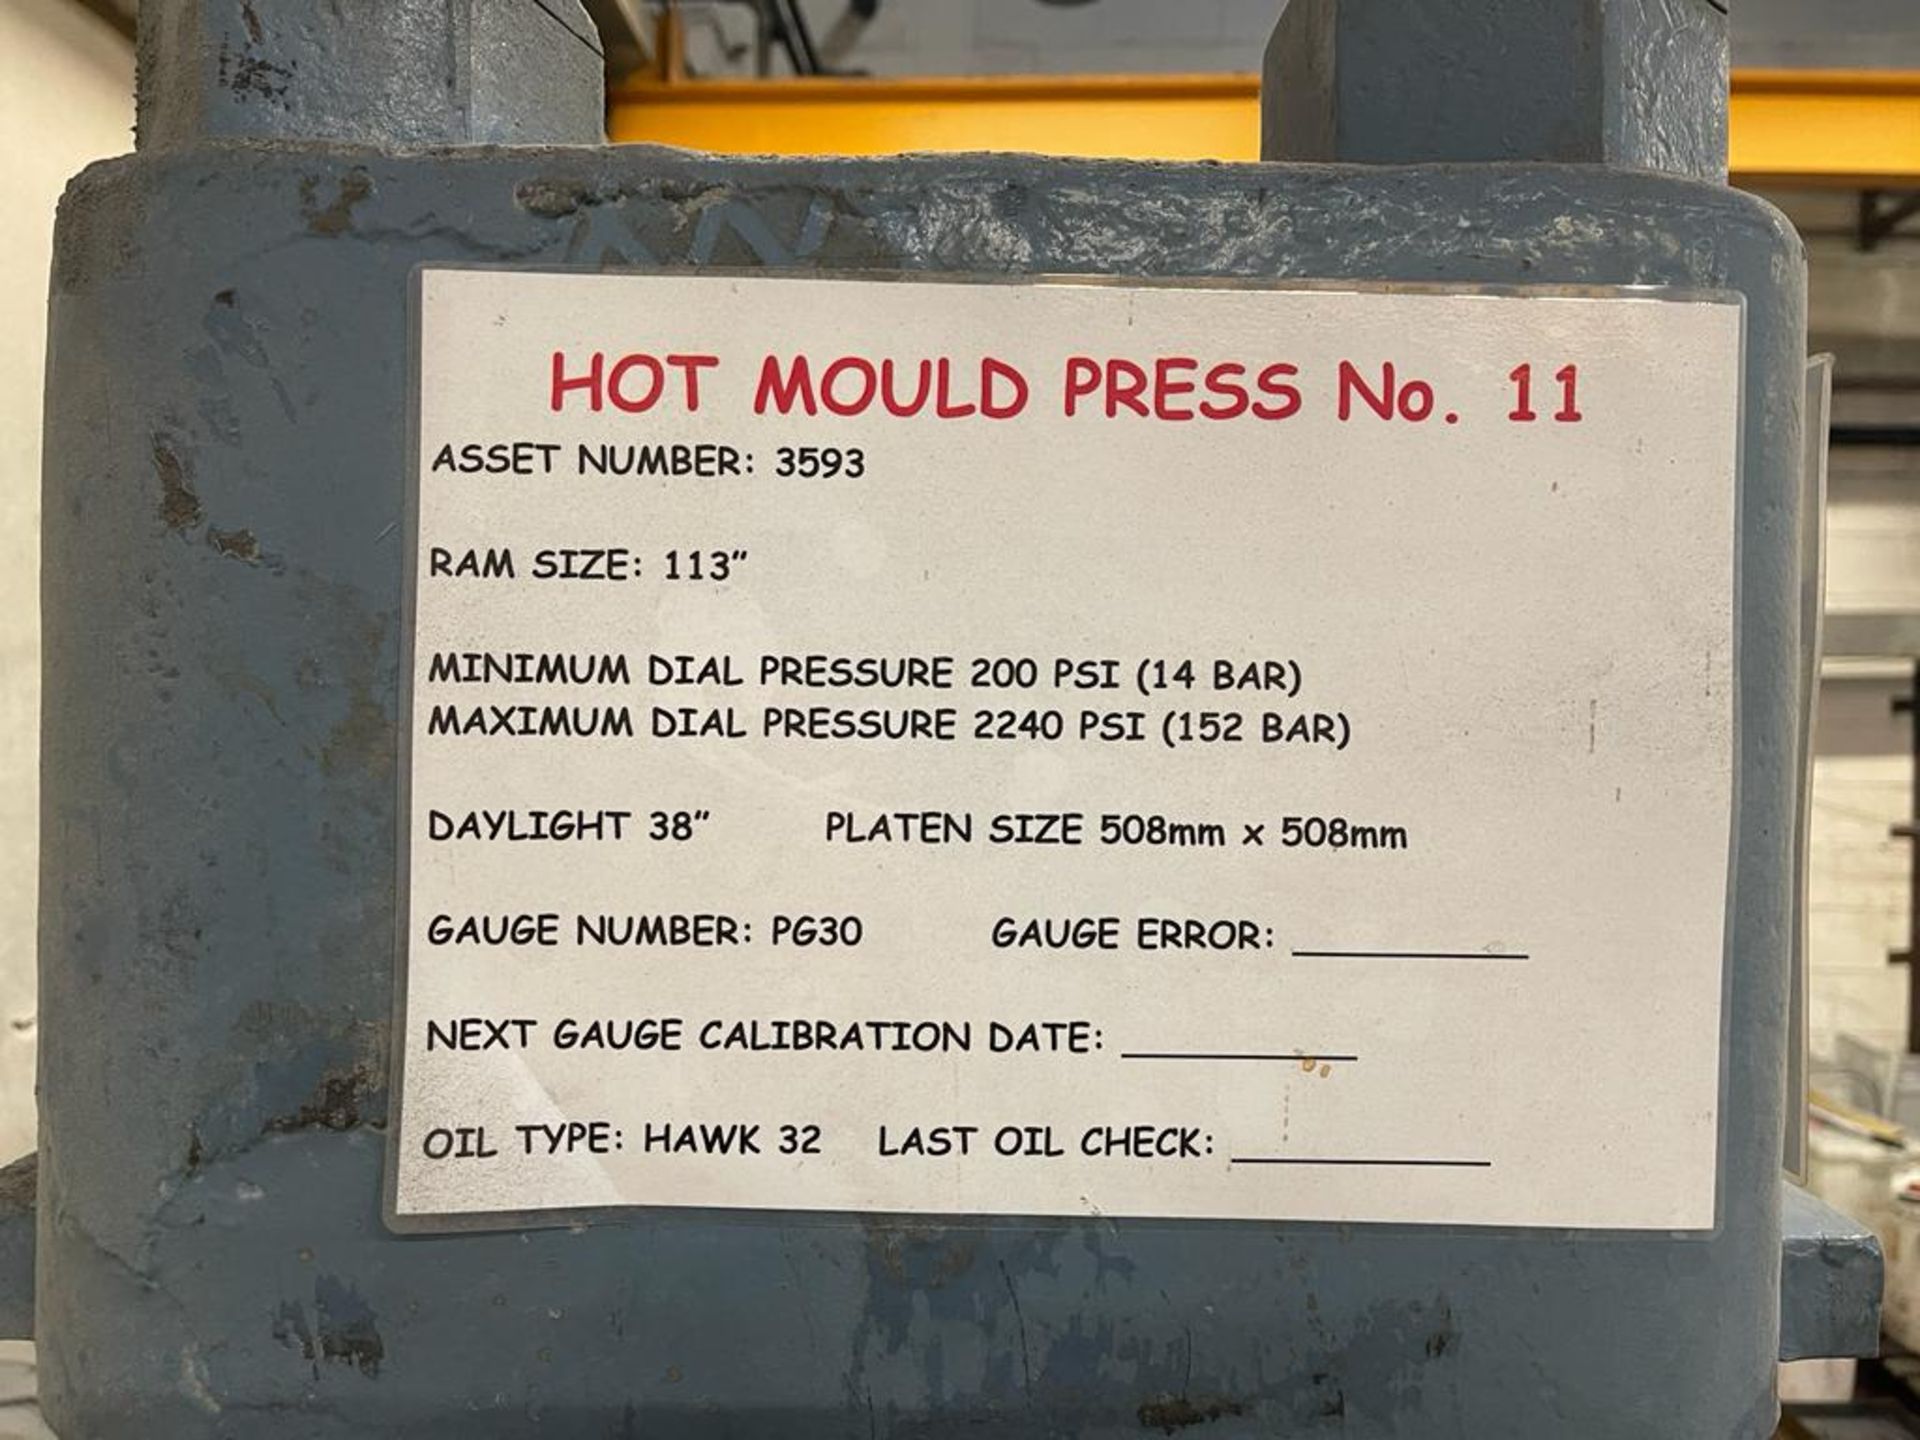 HOT MOULD PRESS, MANUAL HYDRAULIC PRESS WITH UPSTROKING ARM, THE PRESS HAS A VERY LARGE PLATEN - Image 3 of 3